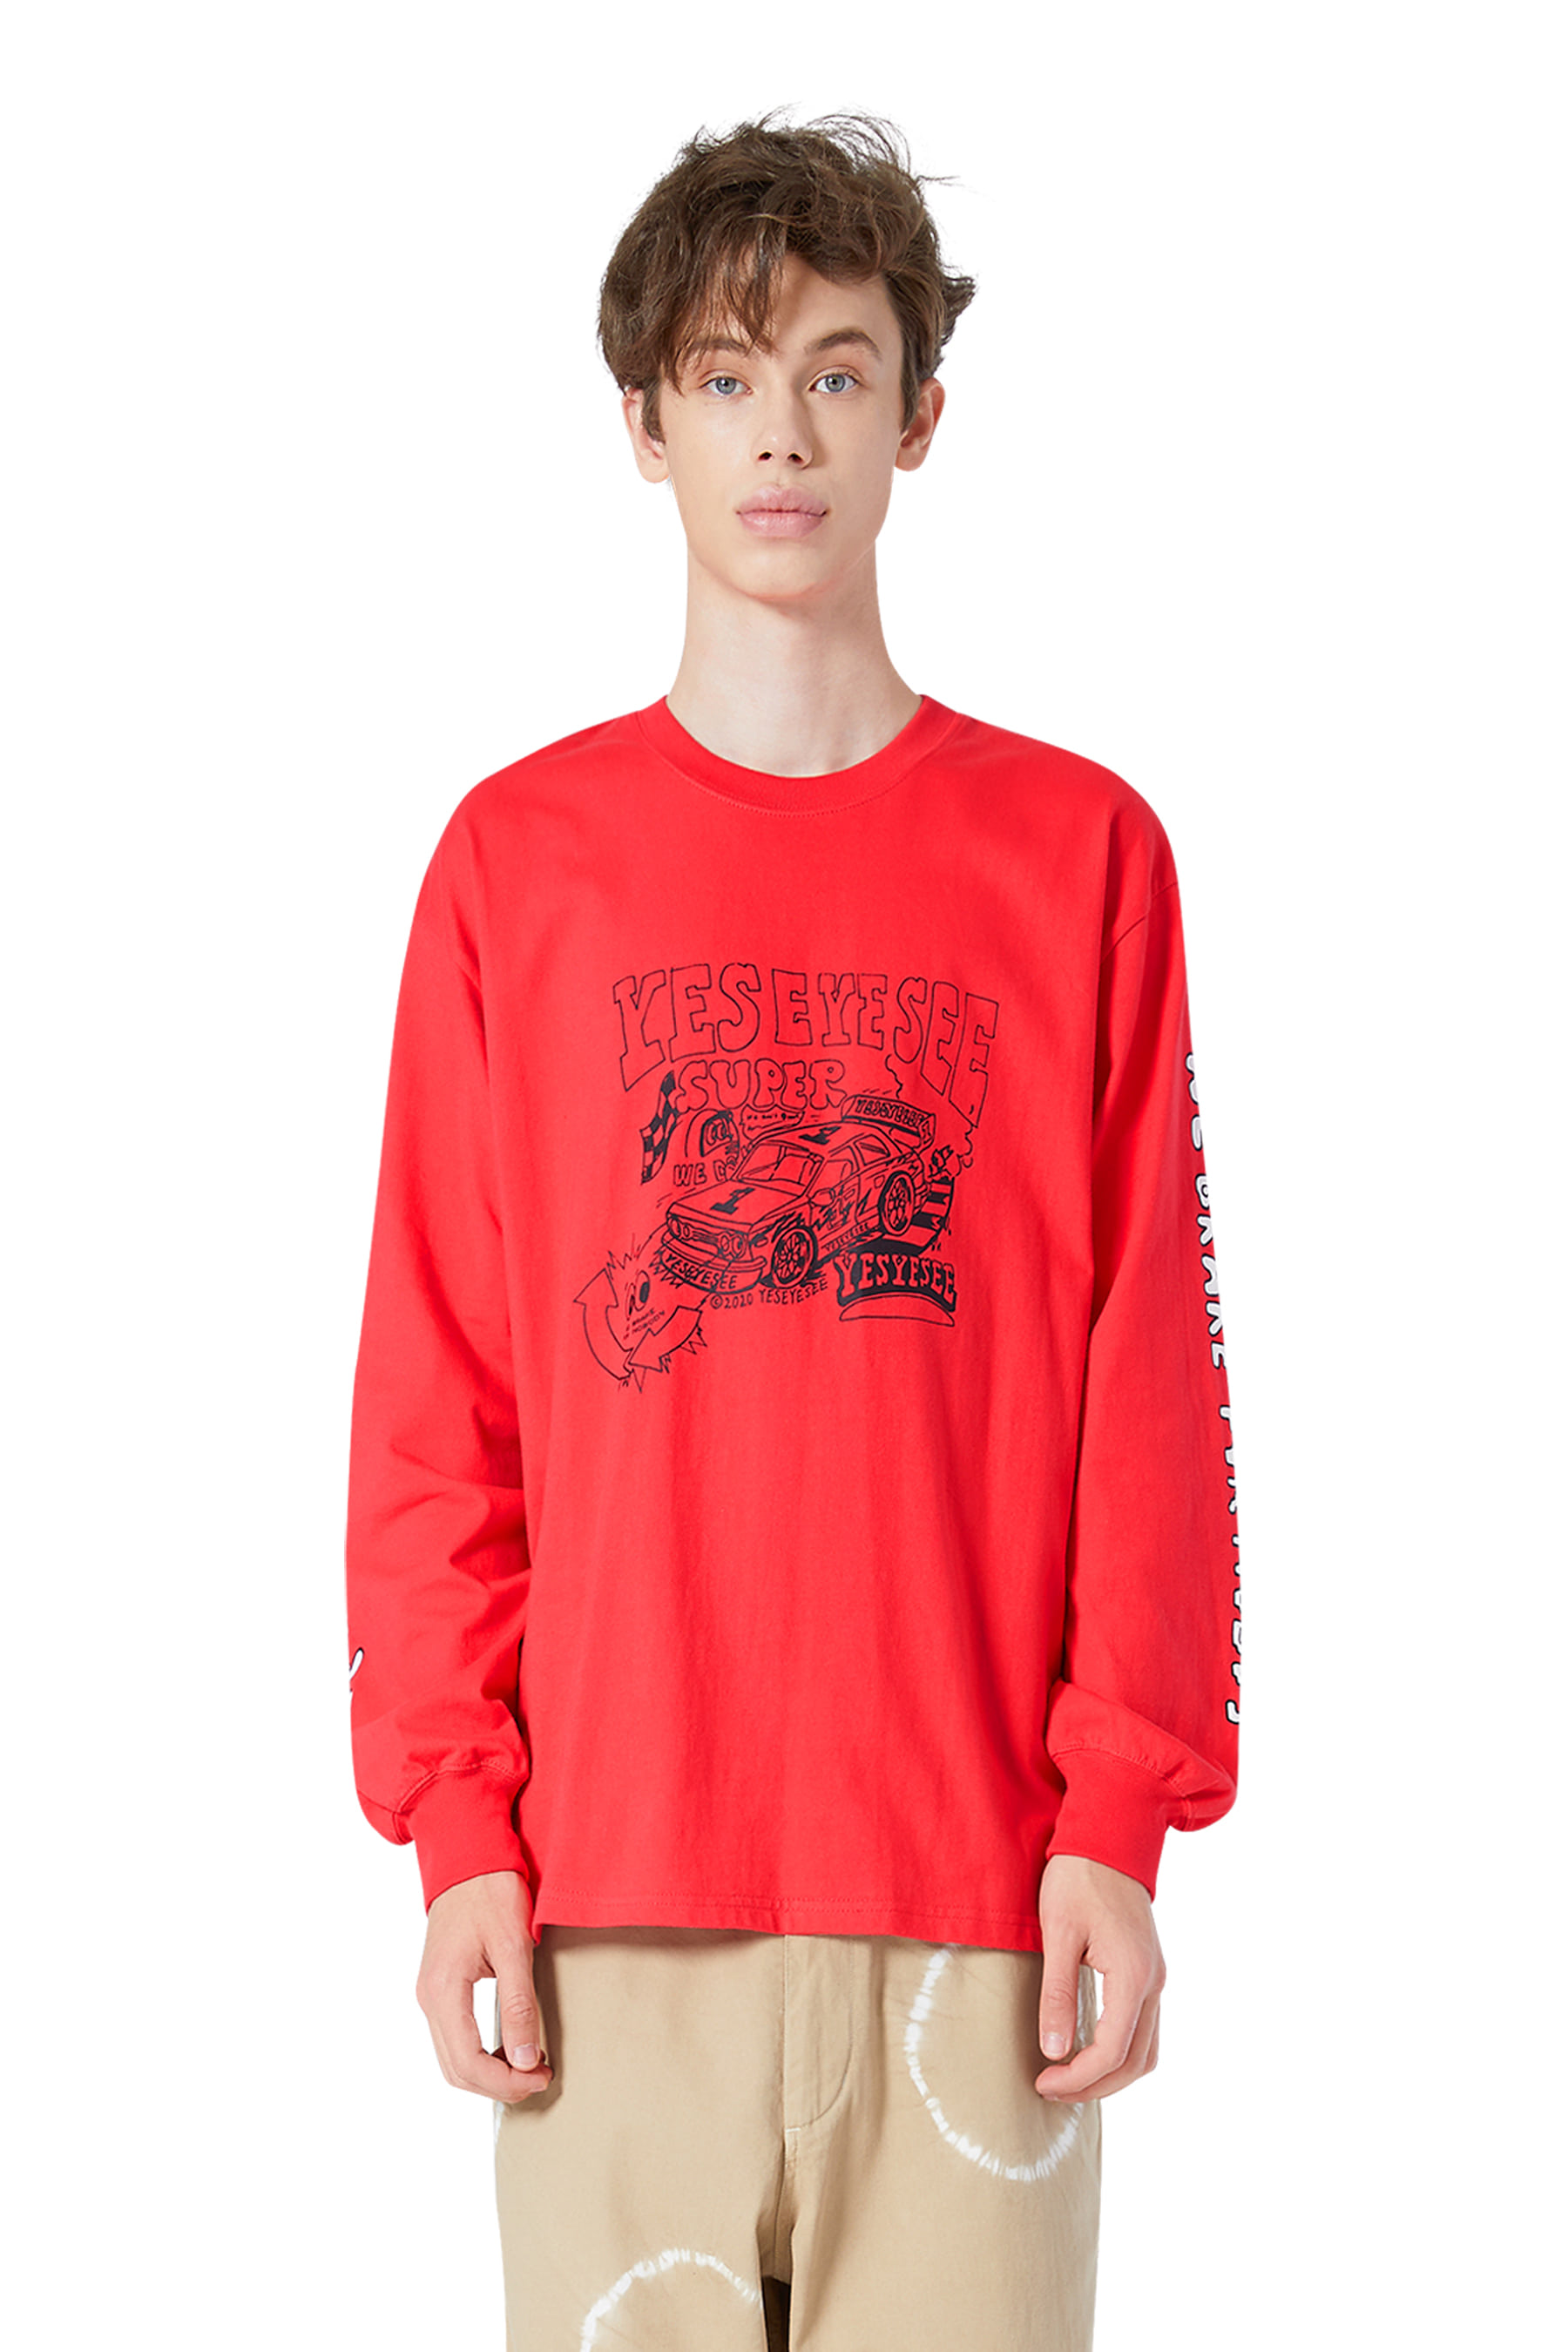 Y.E.S Racer L/S Red